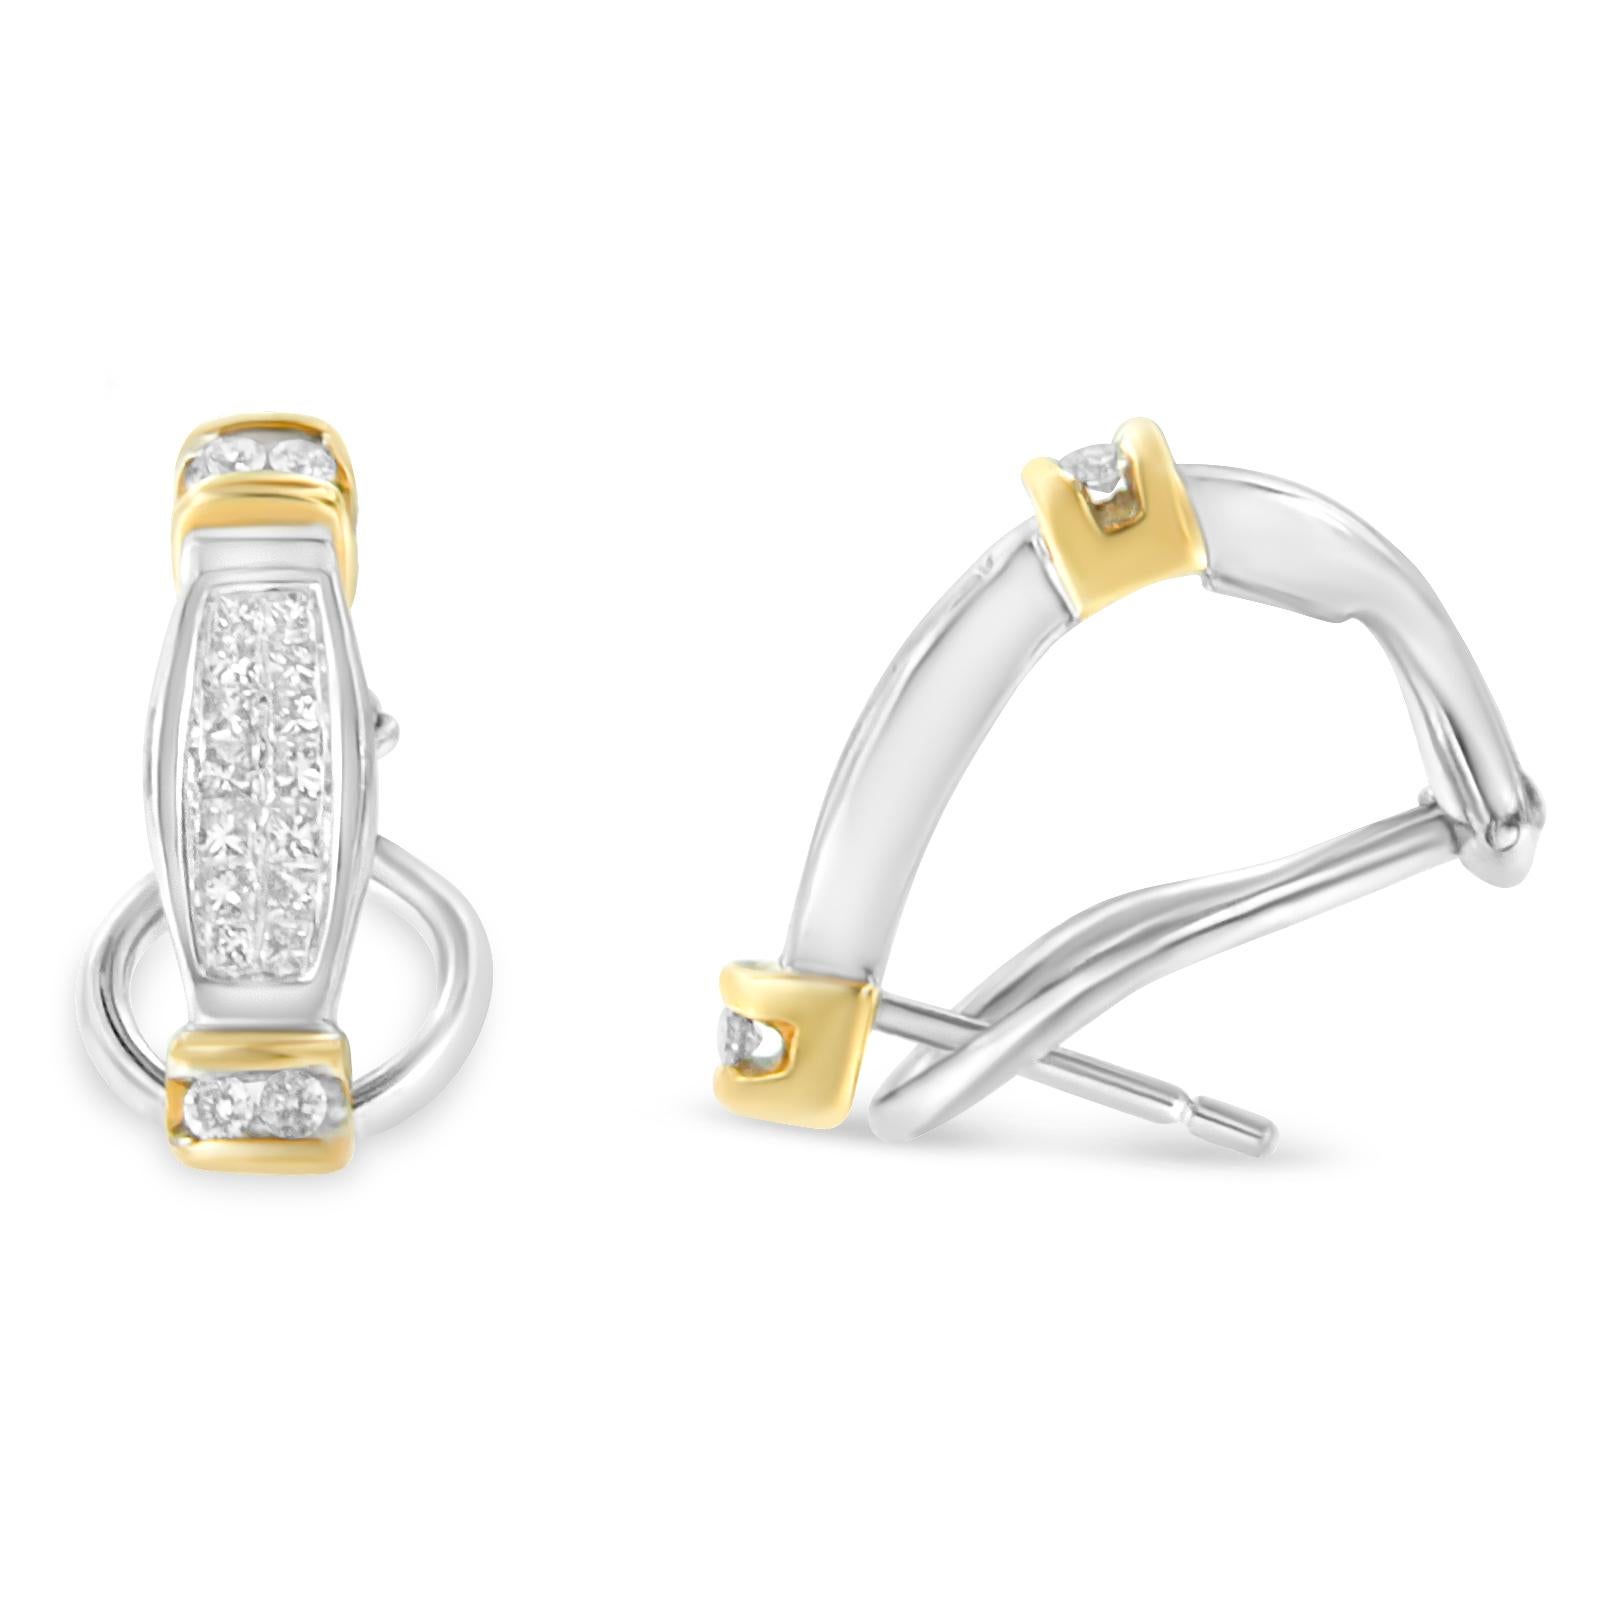 Stunningly designed, these diamond hoop earrings will surely grace your look. Composed of two-toned 14 karat white and yellow gold, these hoop earrings have a modern yet stylish design. Each of the pieces is embellished with sparkling round and